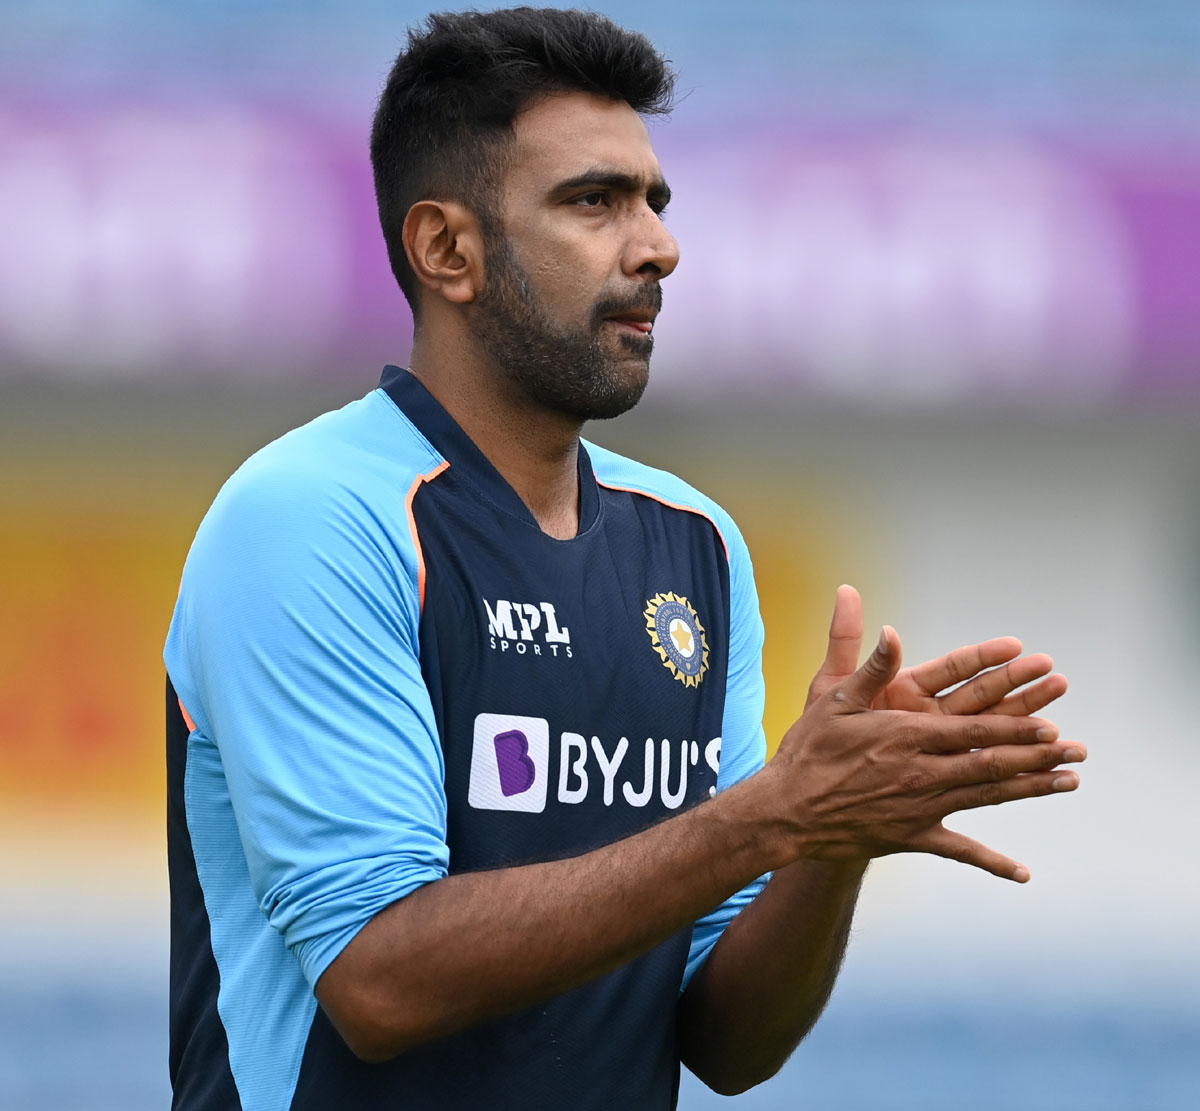 While Ravichandran Ashwin's name is doing rounds for World Cup, sheerly on basis of his skill-sets, a former national selector wondered why wasn't Ashwin asked to stay back in the West Indies after Test series and check his white ball form in the ensuing ODIs.